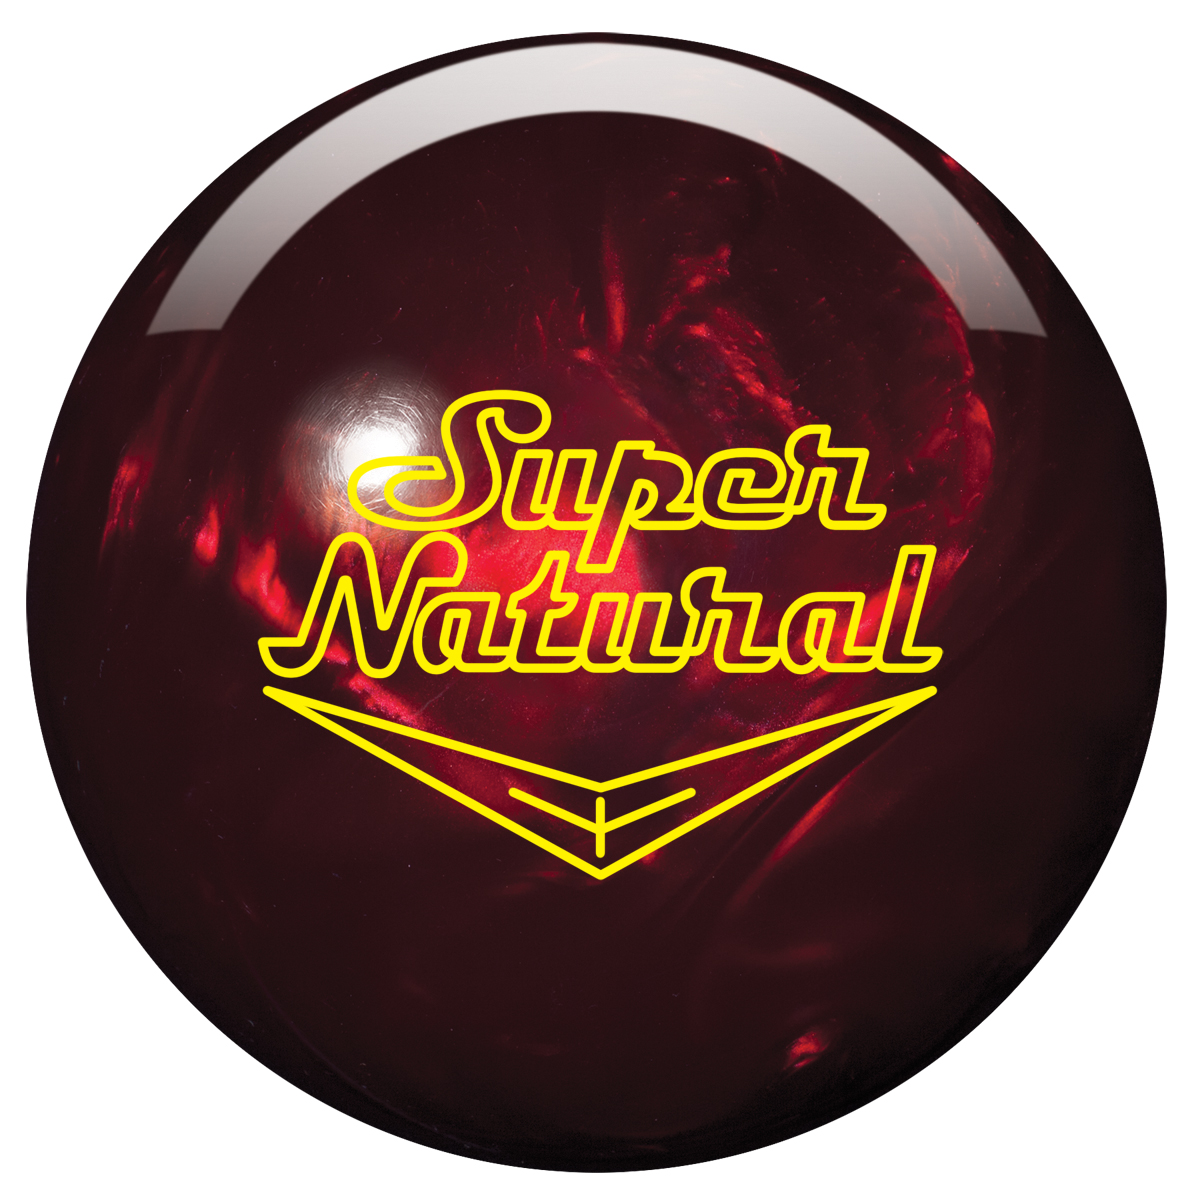 Storm Super Natural Bowling Ball Review with Digitrax Analysis Tamer